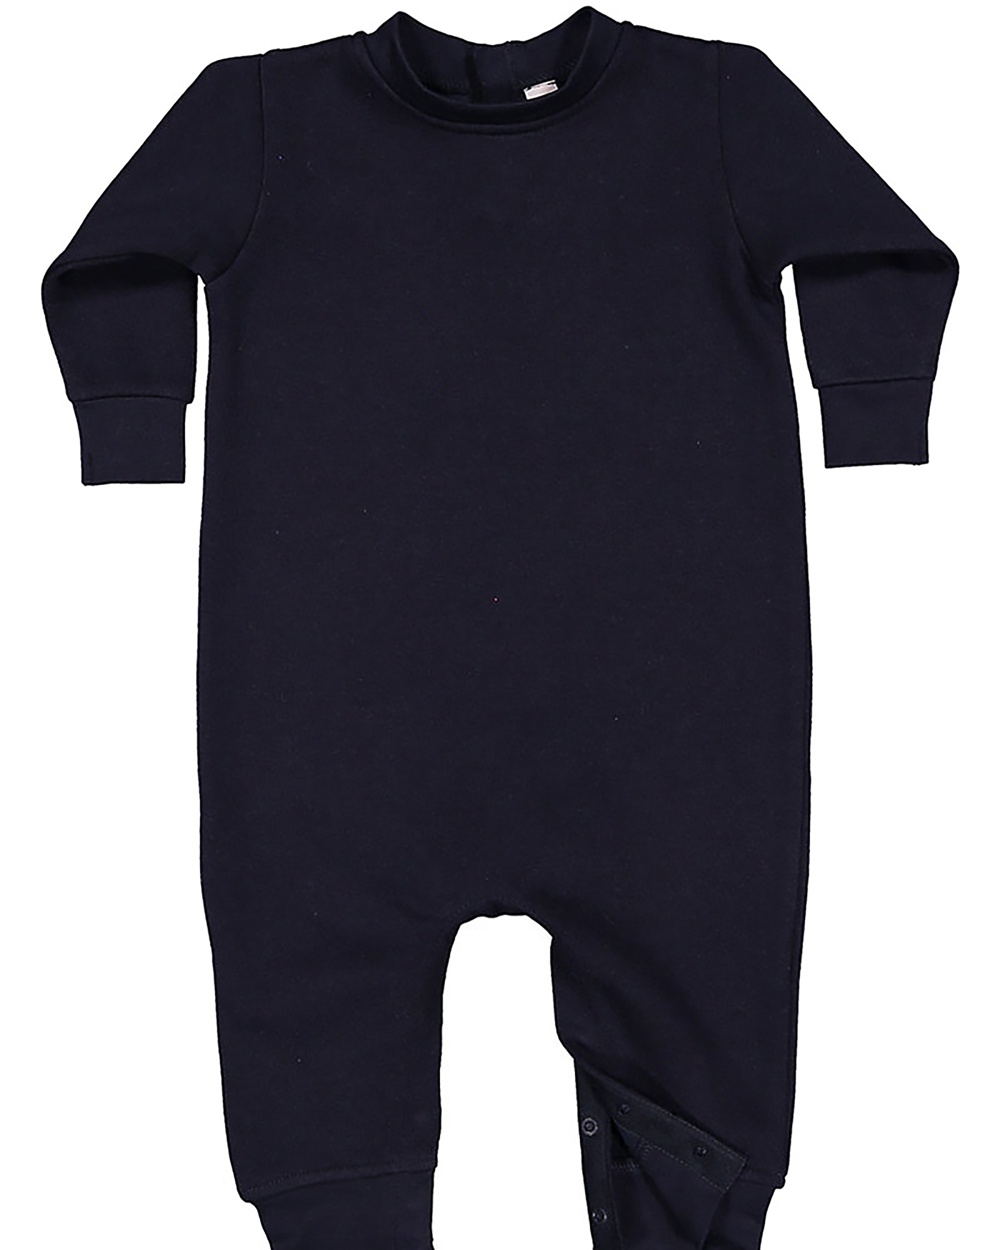 RS747 - Infant Fleece One Piece - One Stop